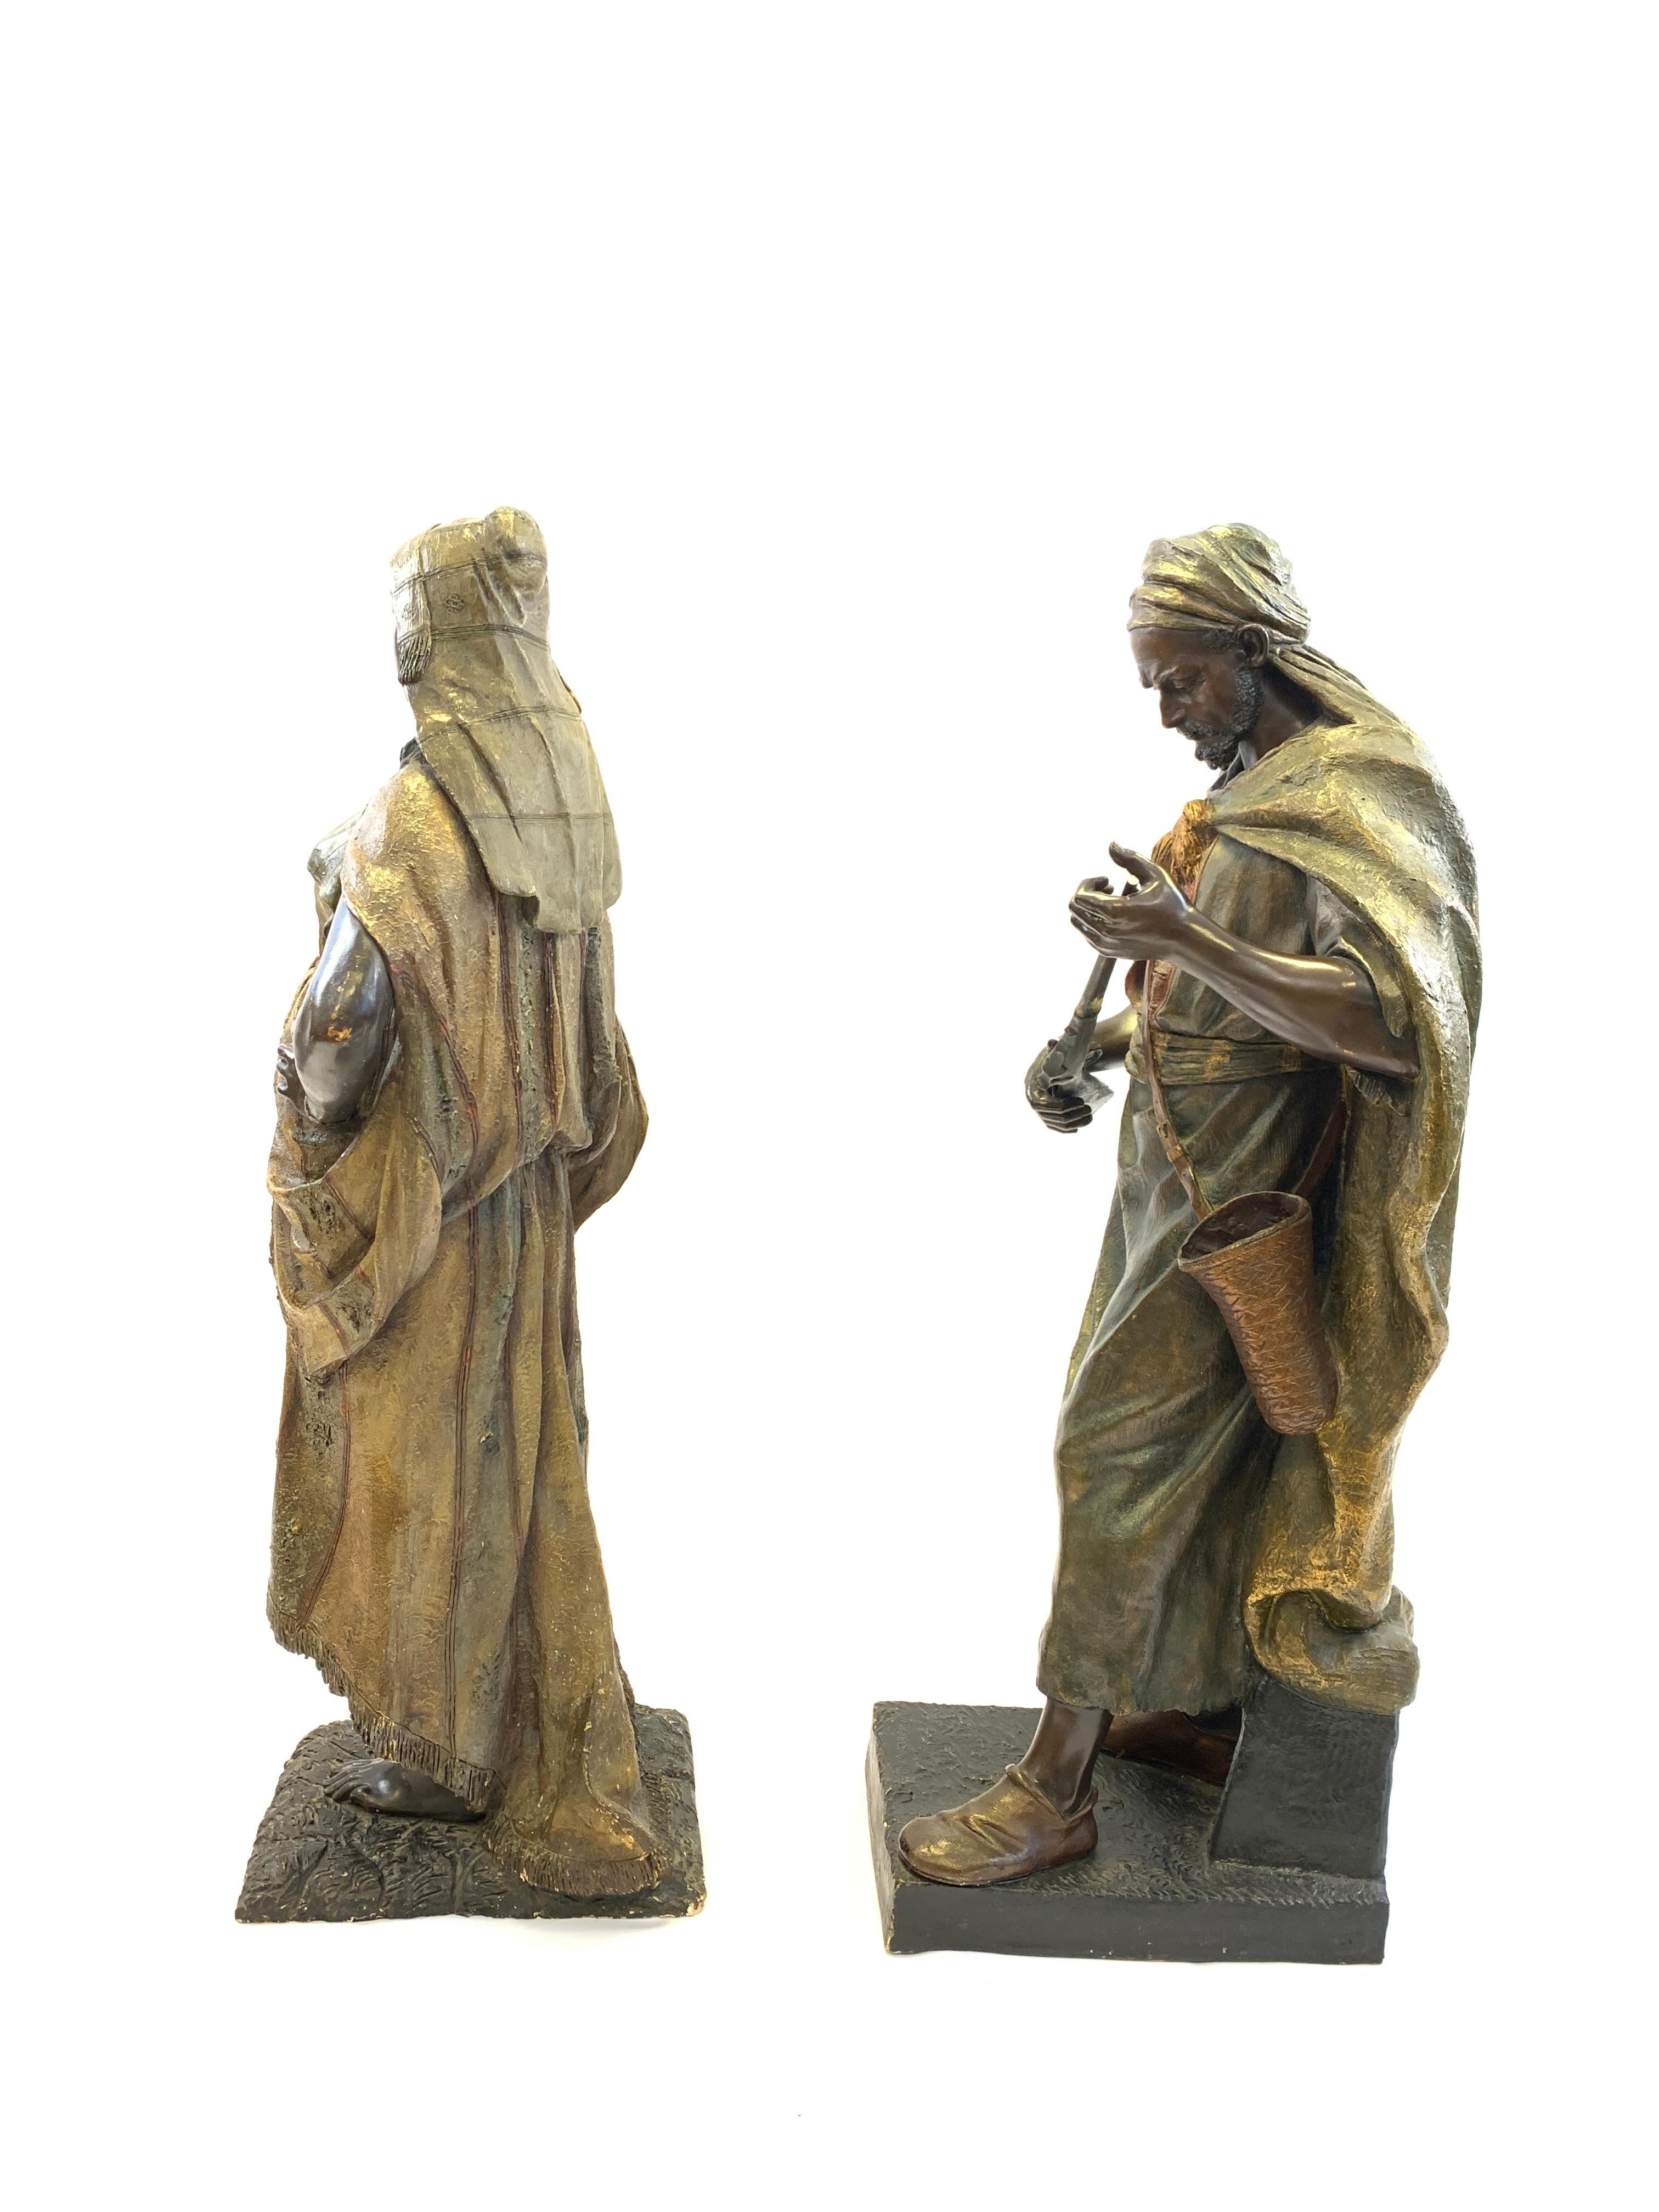 Pair of polychrome terracotta figures of an oriental lady and Arab soldier by Friedrich Goldscheider, 19th century.

An impressive cold painted Terracotta statues of a 19th century Arab soldier and young woman dressed in exquisite drapes by